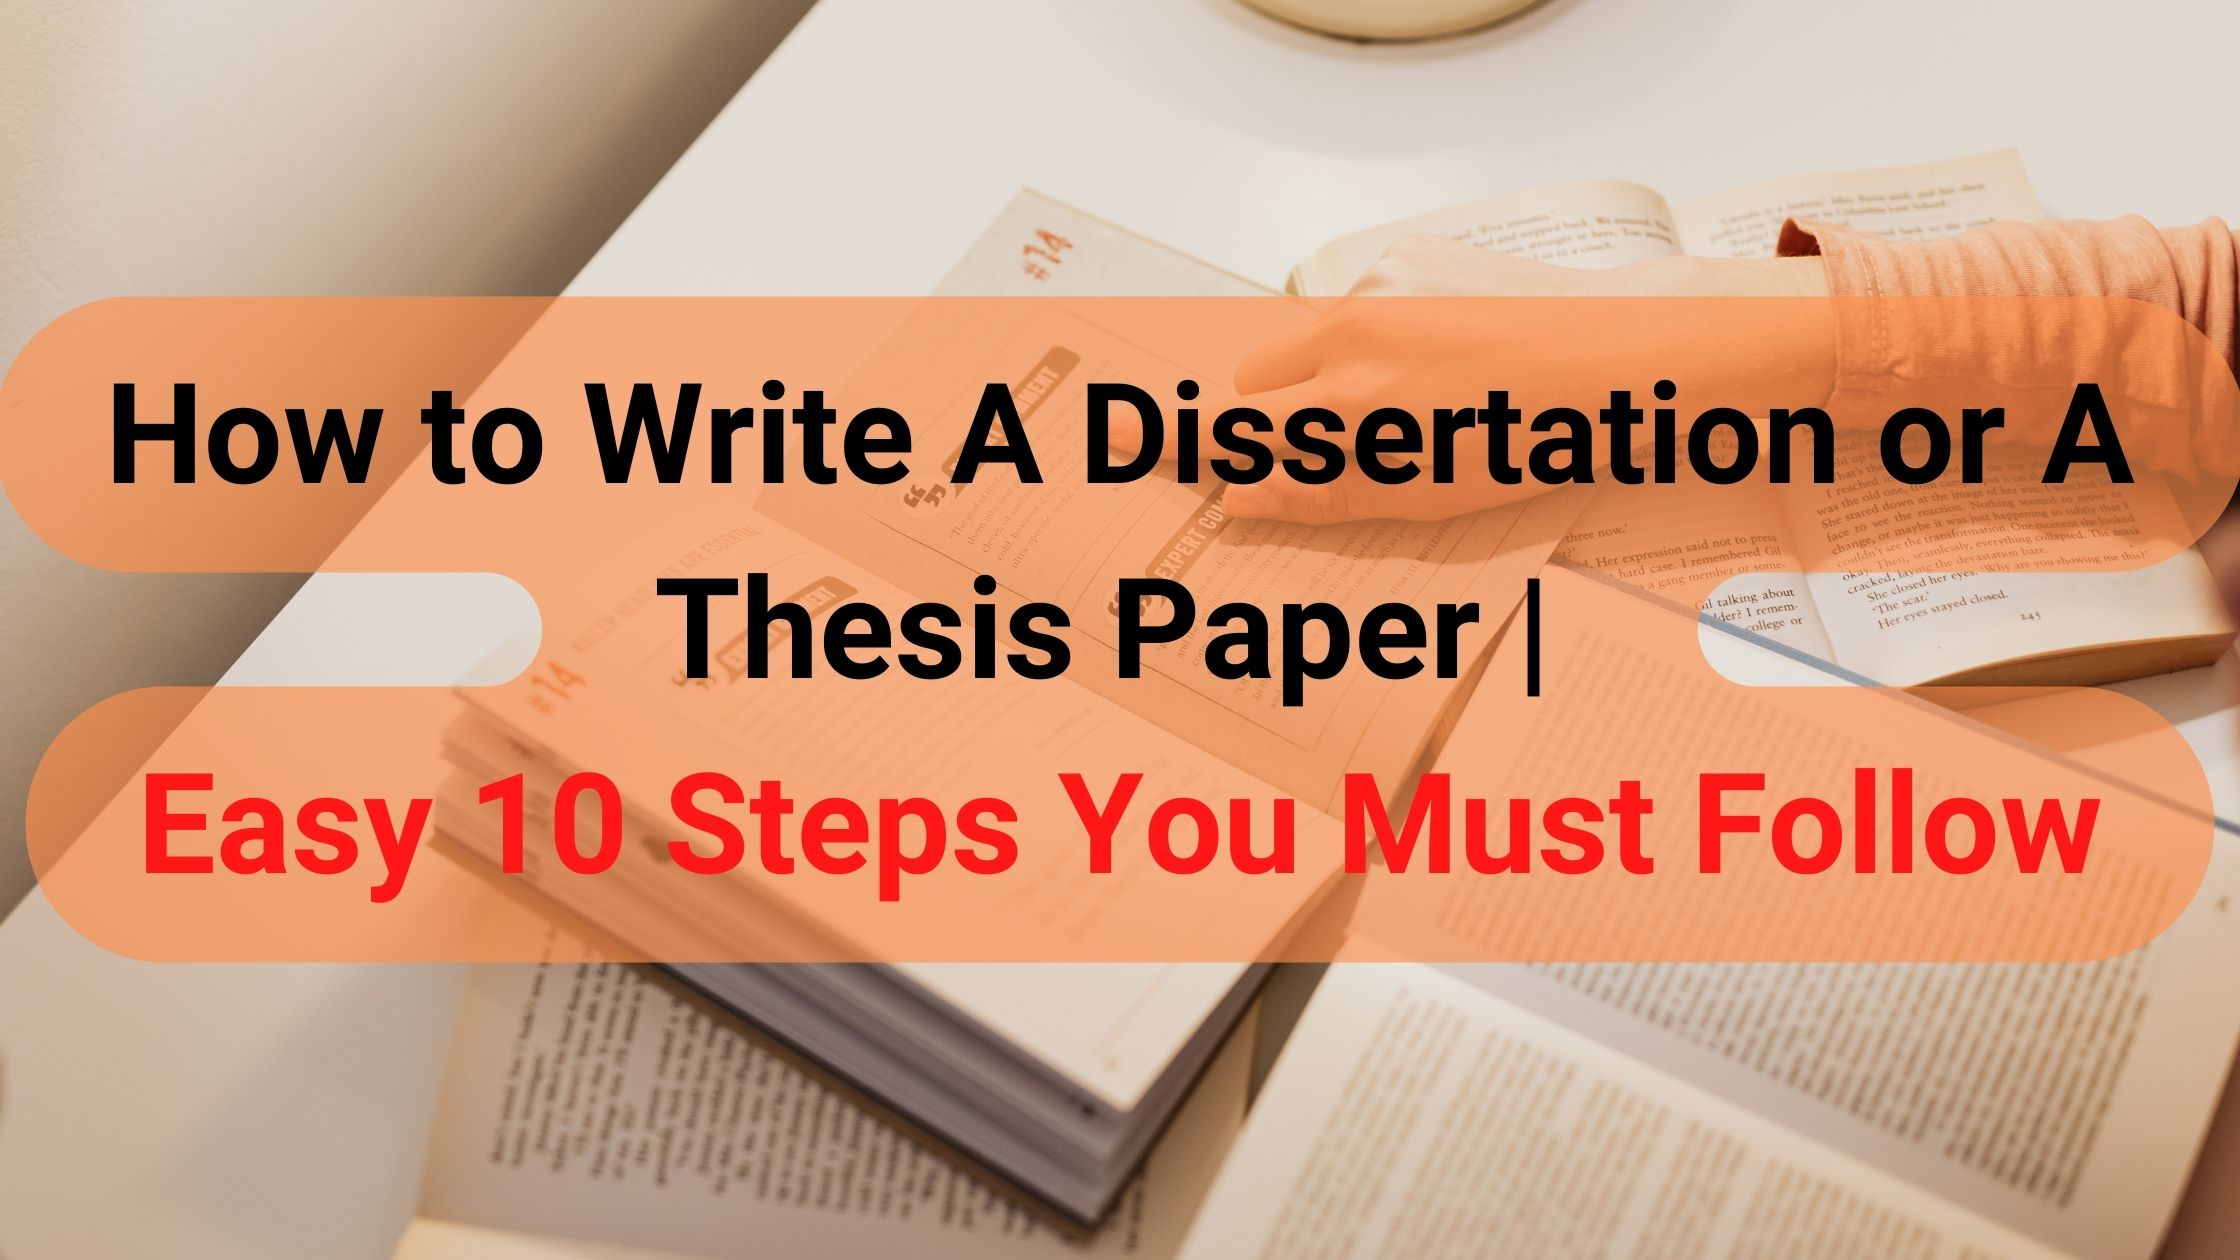 How to Write A Dissertation or A Thesis Paper | Easy 10 Steps You Must Follow